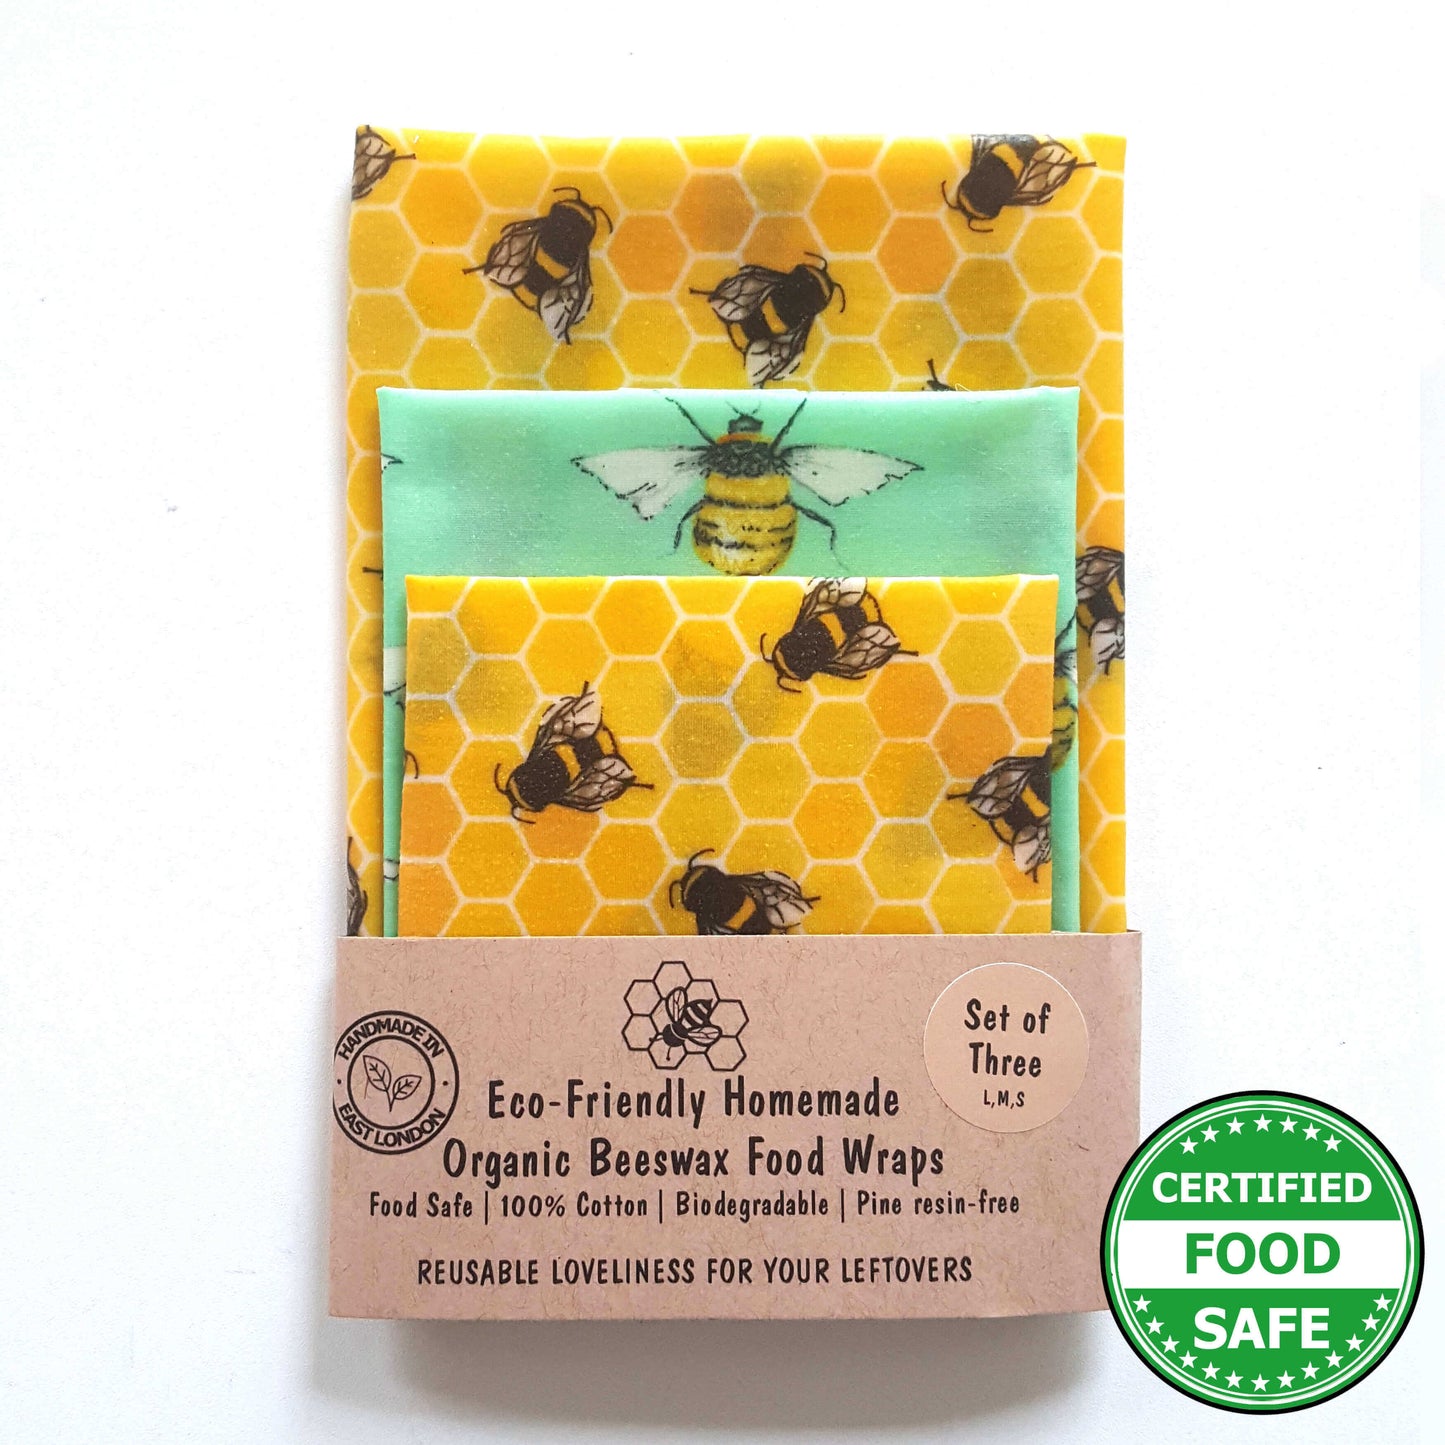 Reusable Beeswax Food Wraps 100% Hand Made in the UK by Honey Bee Good. Earth Kind Classic set of 3 in Bee Happy